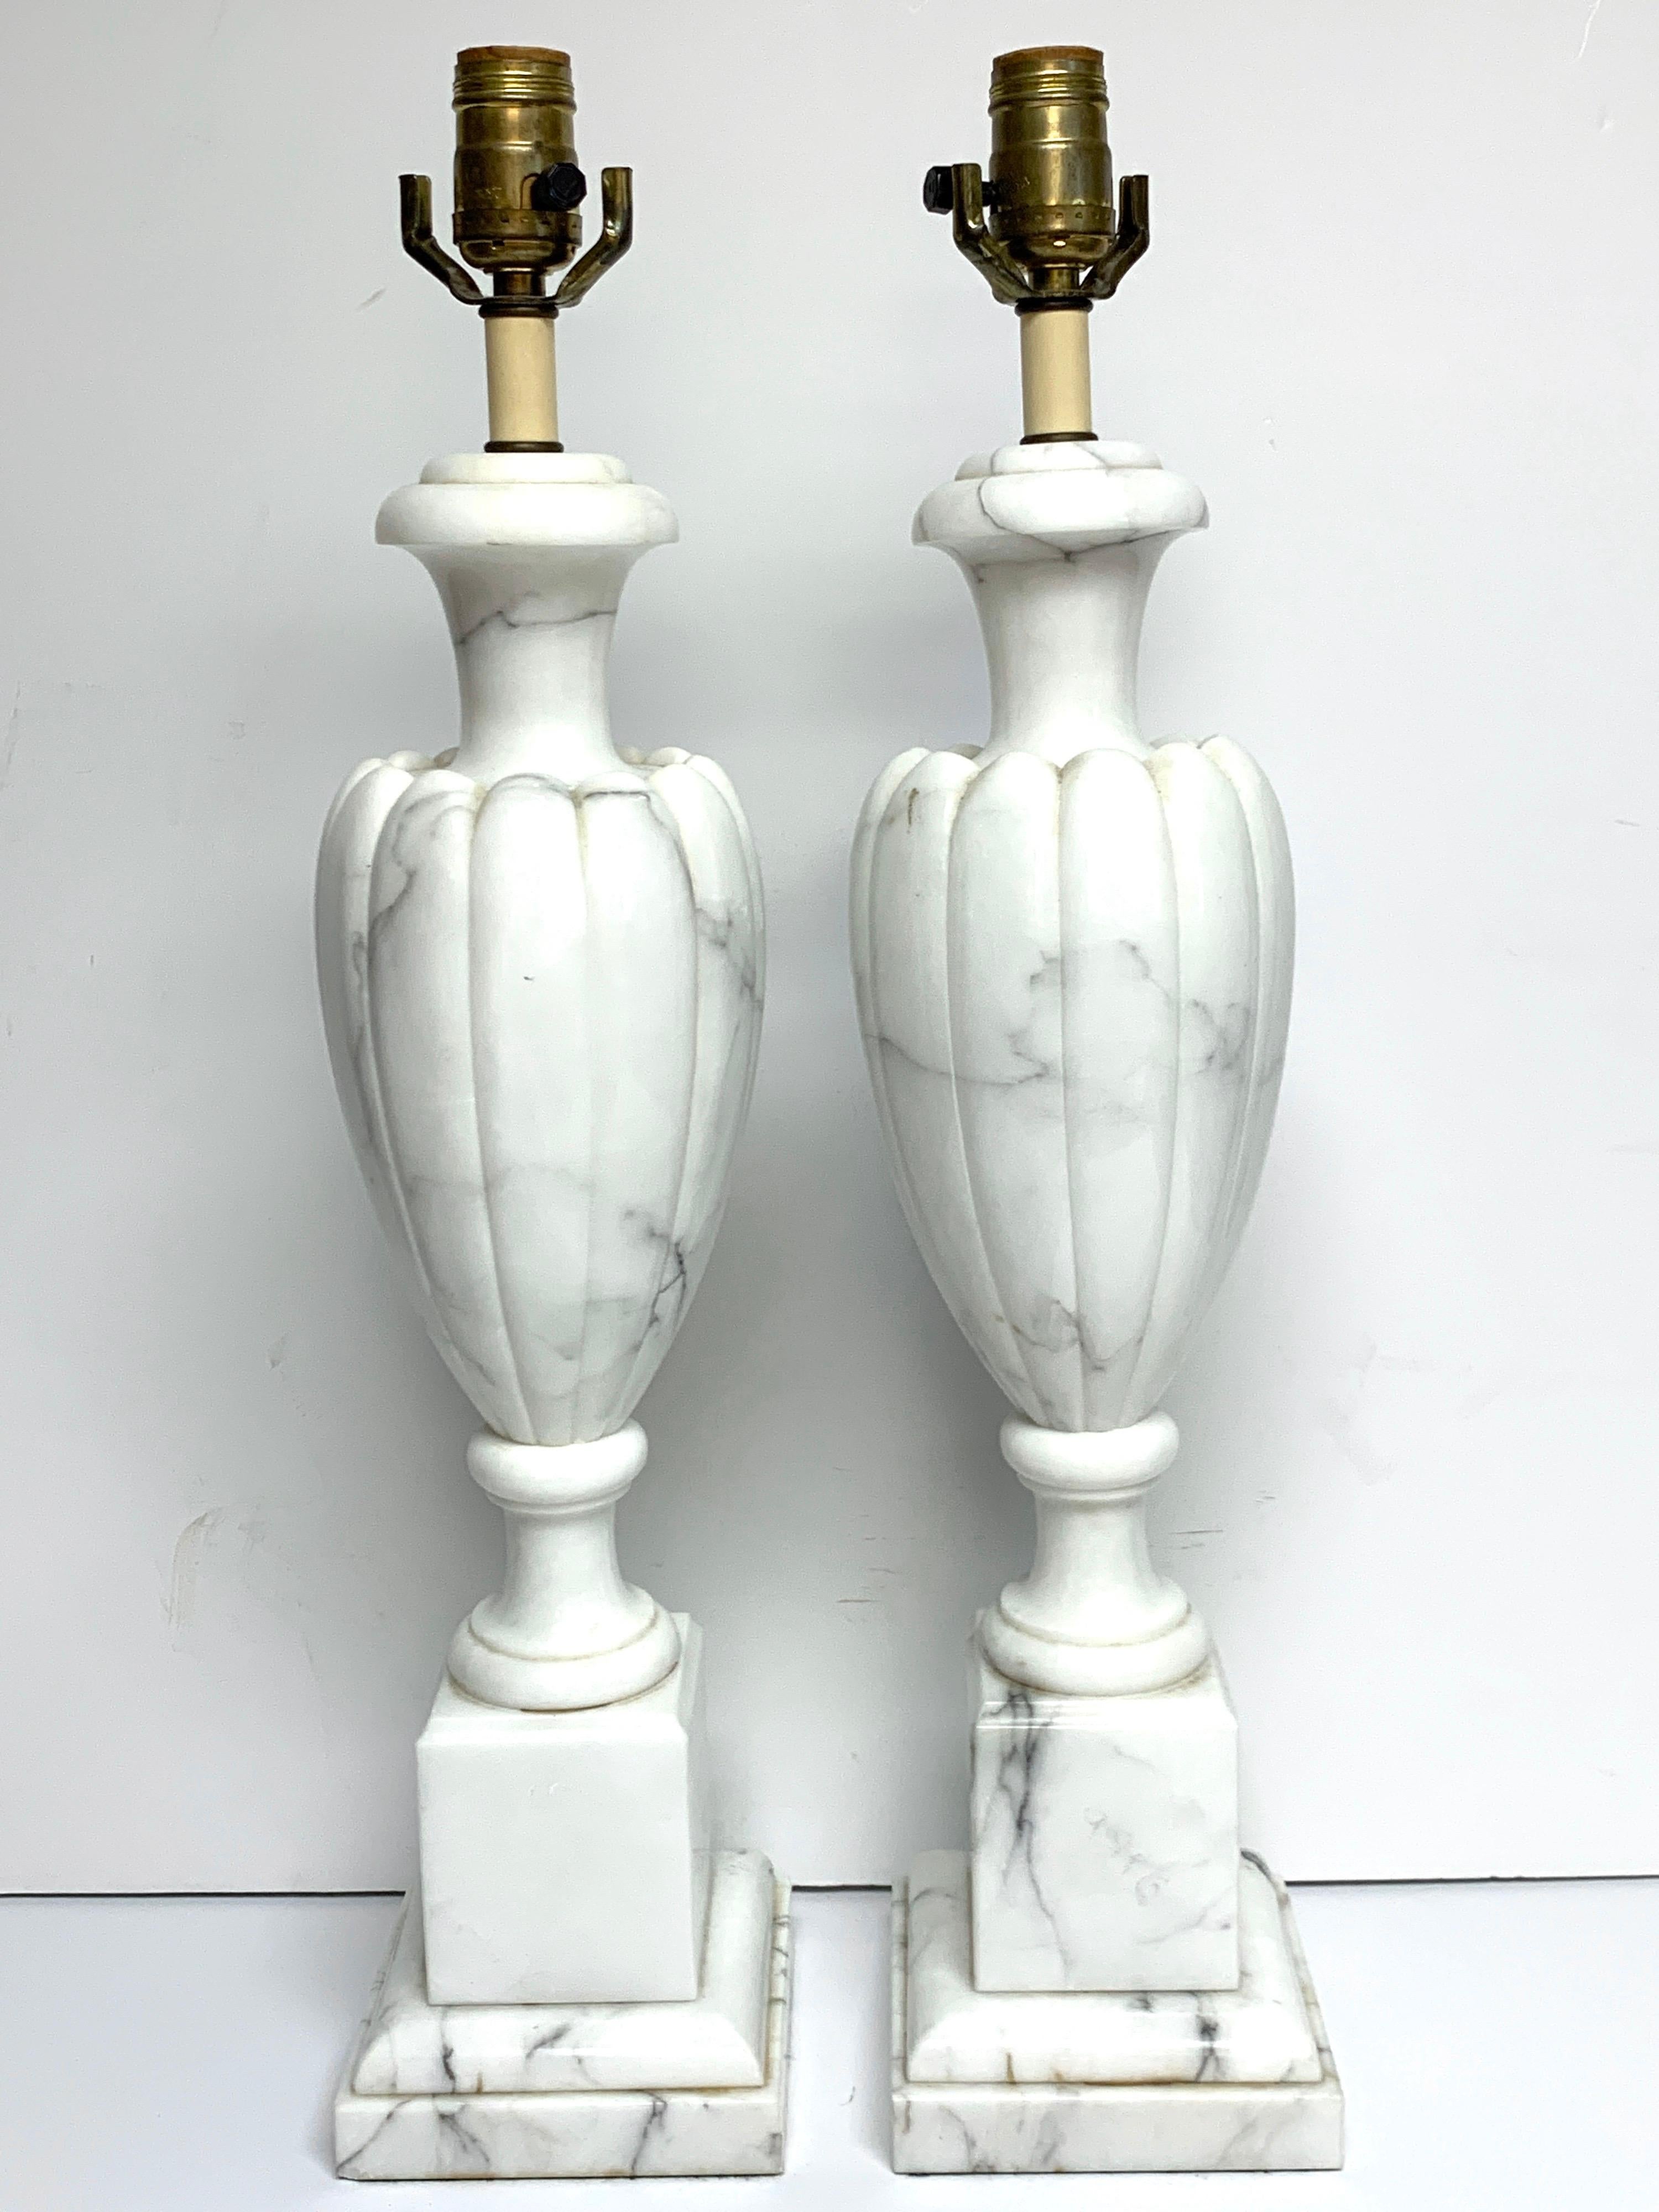 Pair of Italian modern Carrera marble lamps, each one of carved Mellon body raised on 5-inch square pedestal bases. The lamps are 24